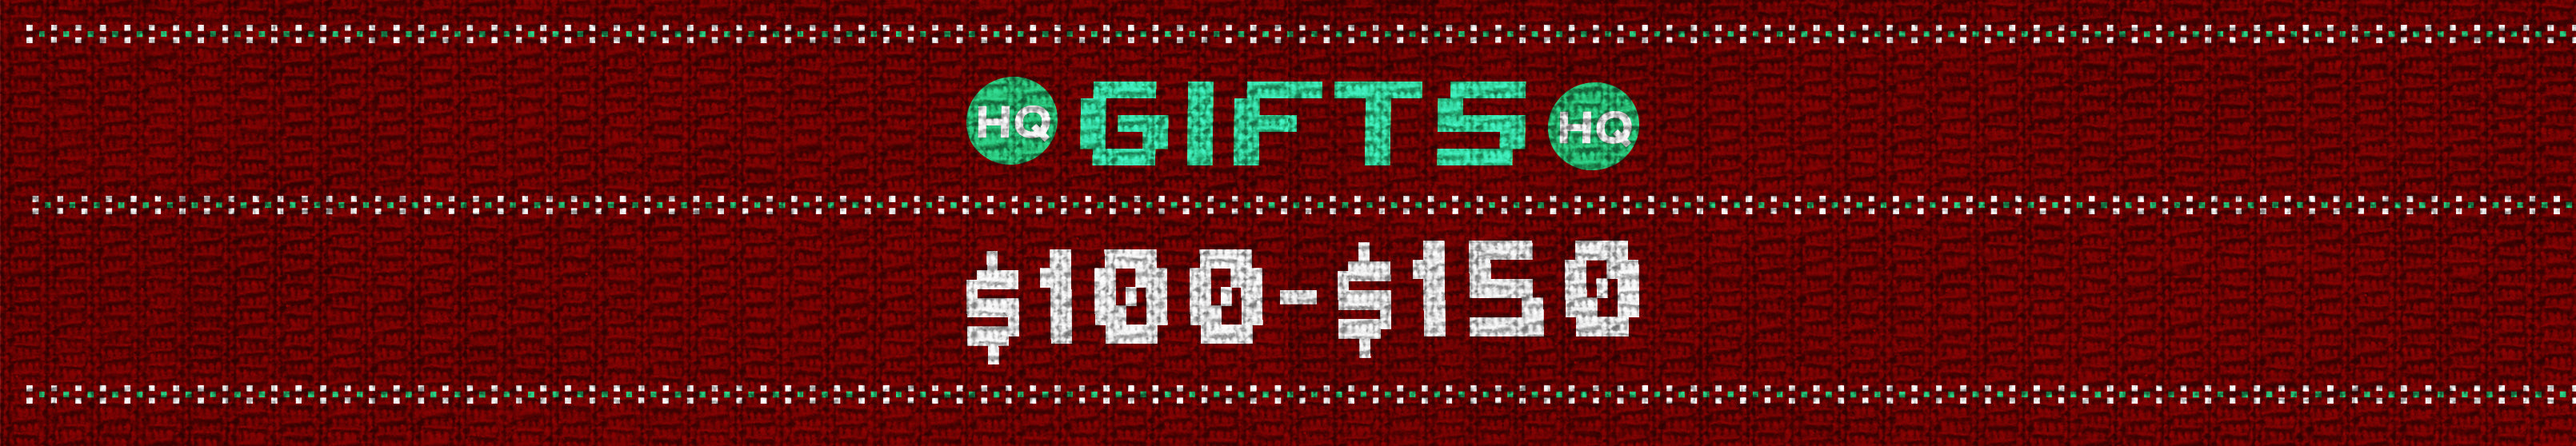 Gifts $100 - $150